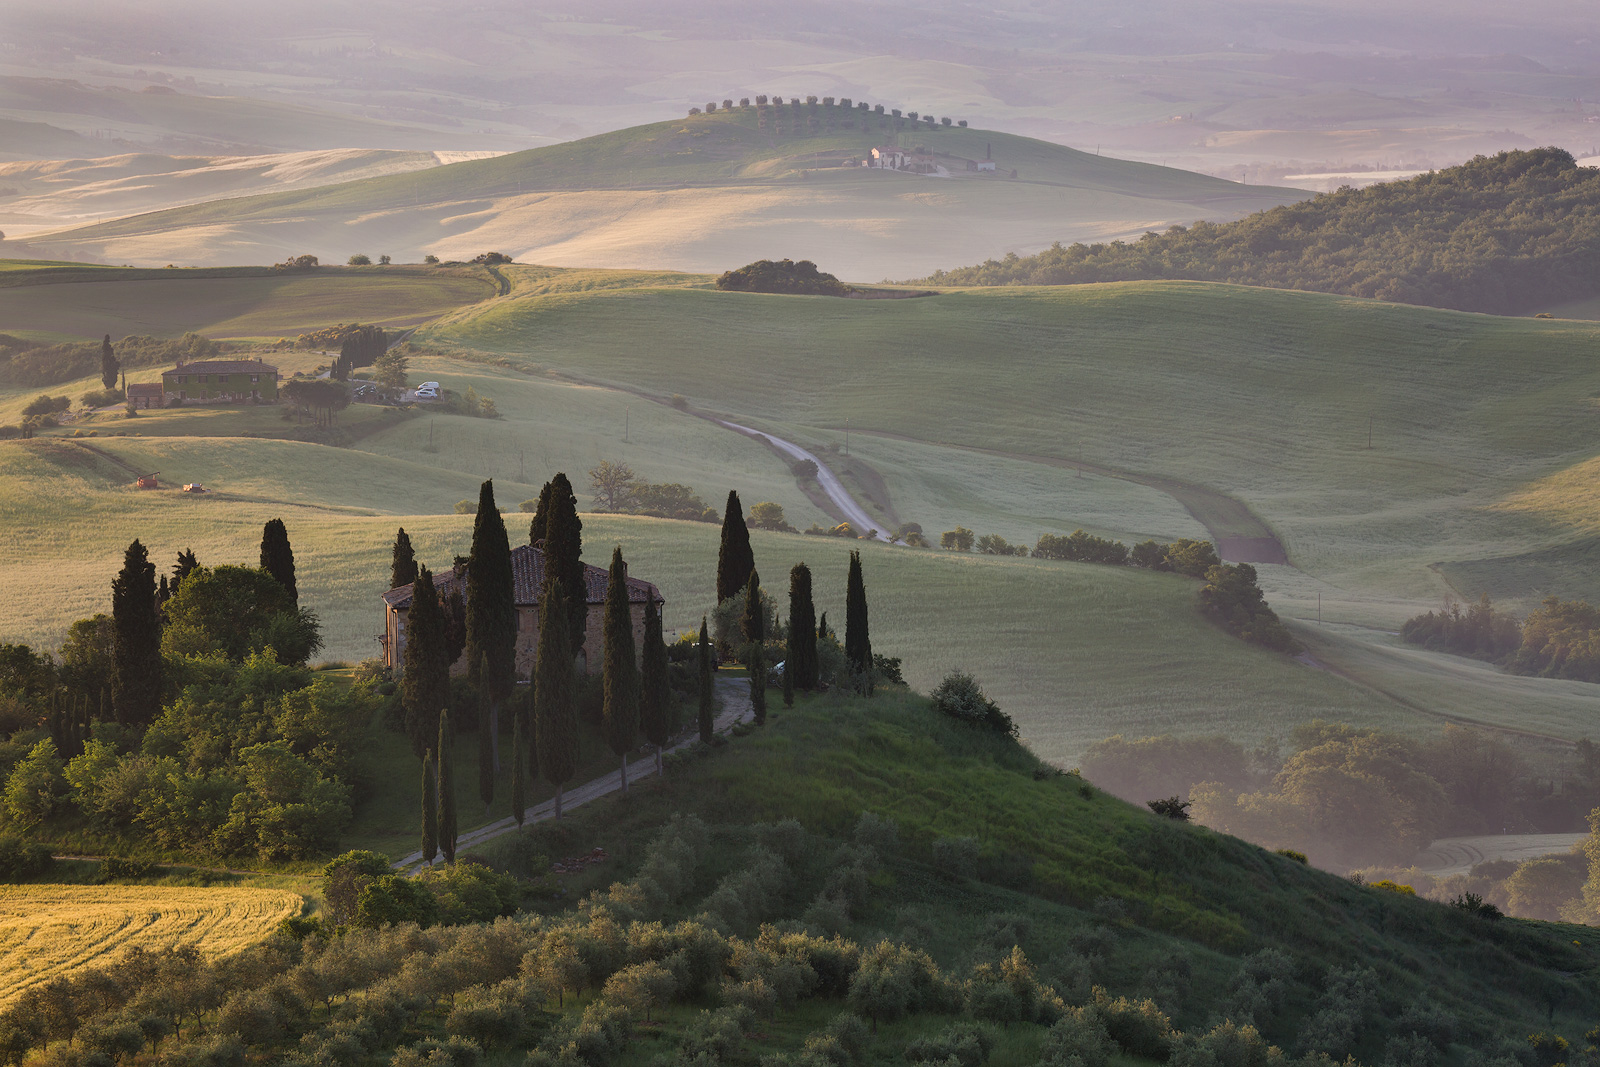 Sun breaking through to side-light the hills of Tuscany.